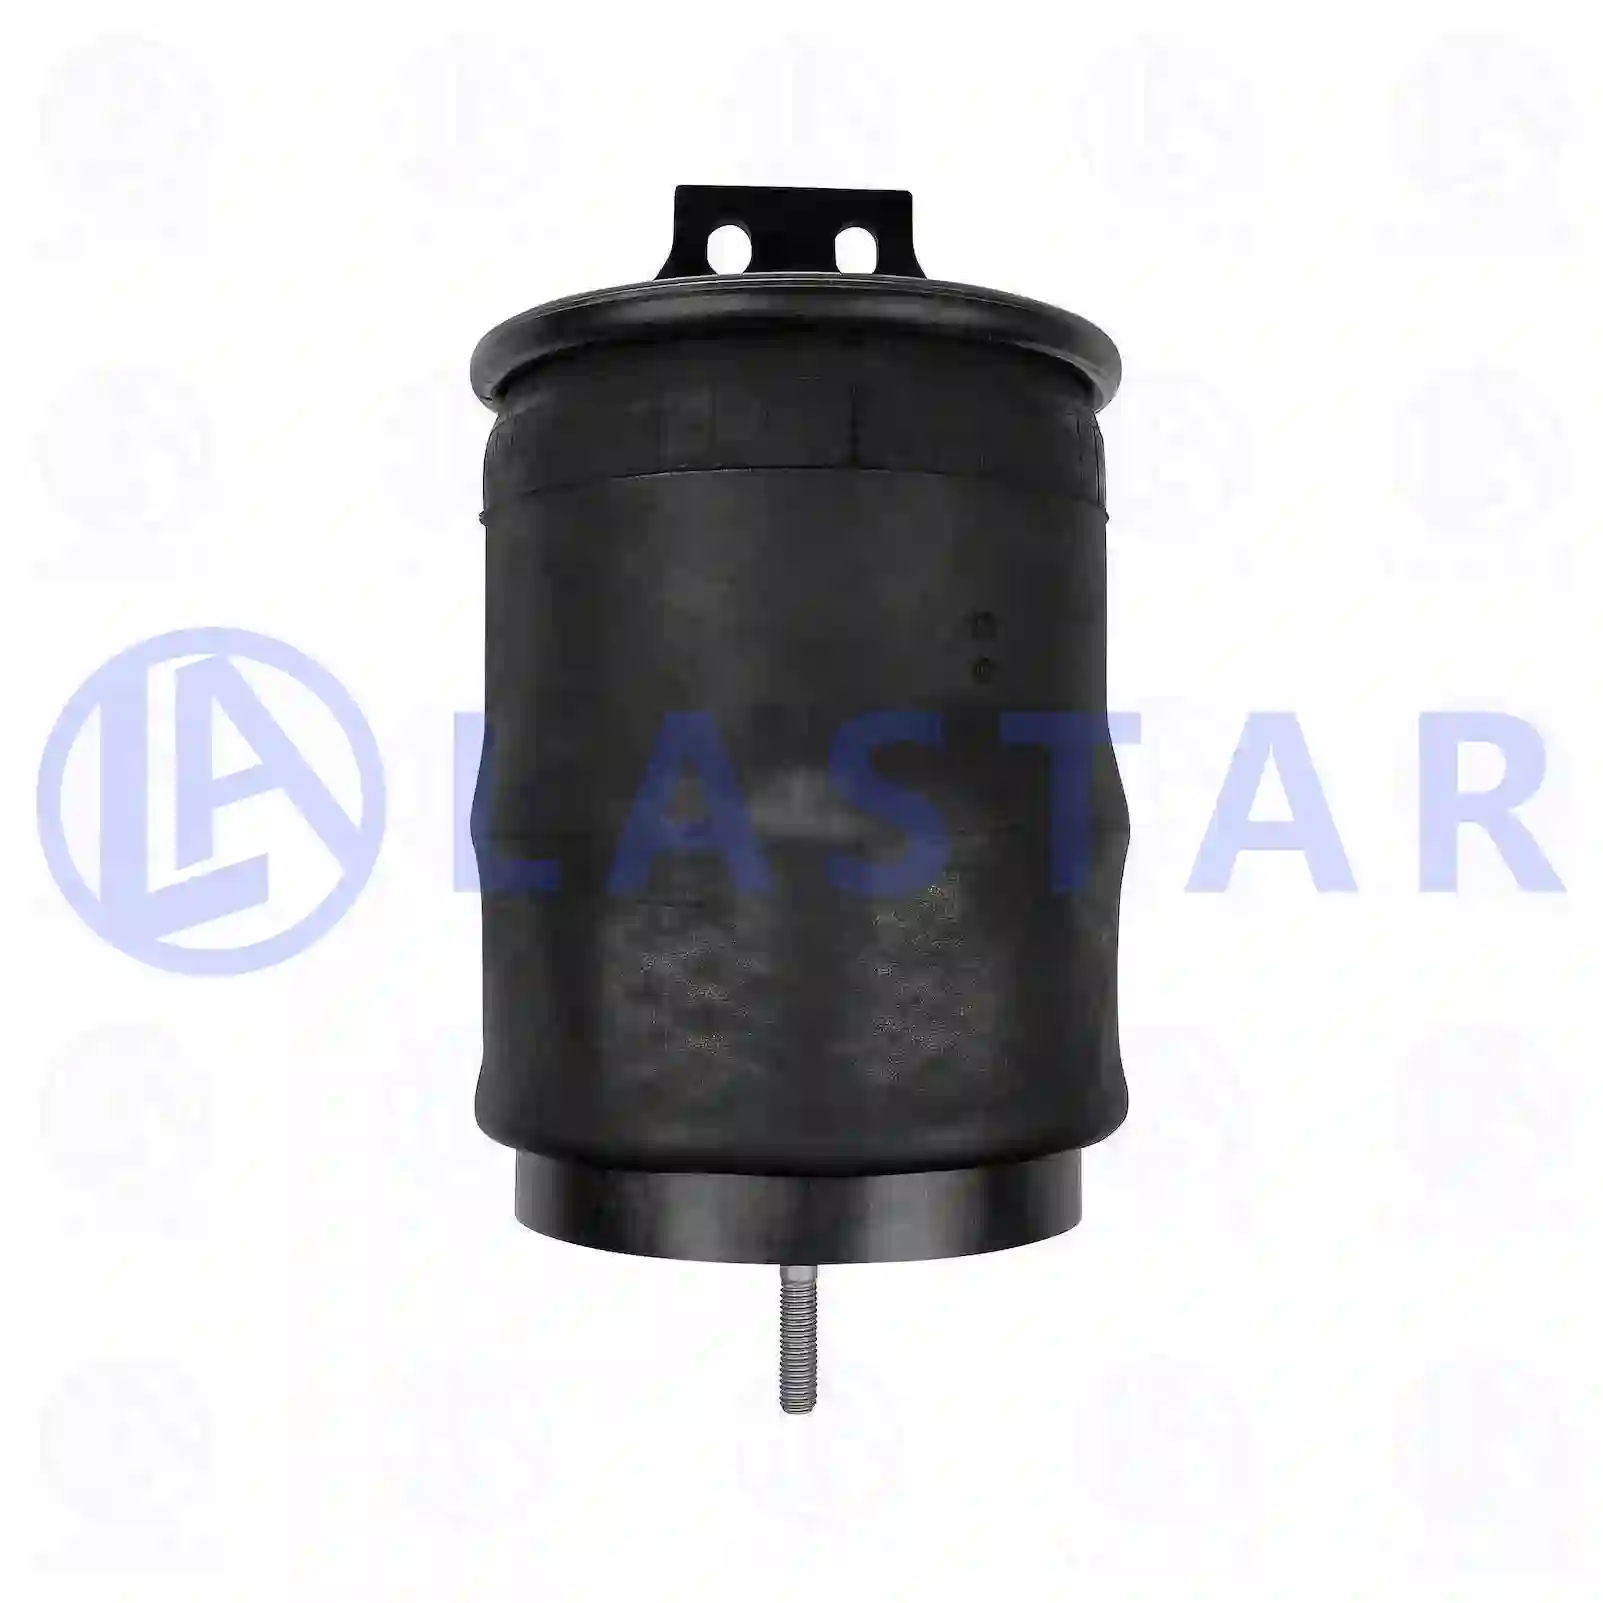 Air spring, with plastic piston, 77727190, 41297179, ZG40730-0008, ||  77727190 Lastar Spare Part | Truck Spare Parts, Auotomotive Spare Parts Air spring, with plastic piston, 77727190, 41297179, ZG40730-0008, ||  77727190 Lastar Spare Part | Truck Spare Parts, Auotomotive Spare Parts